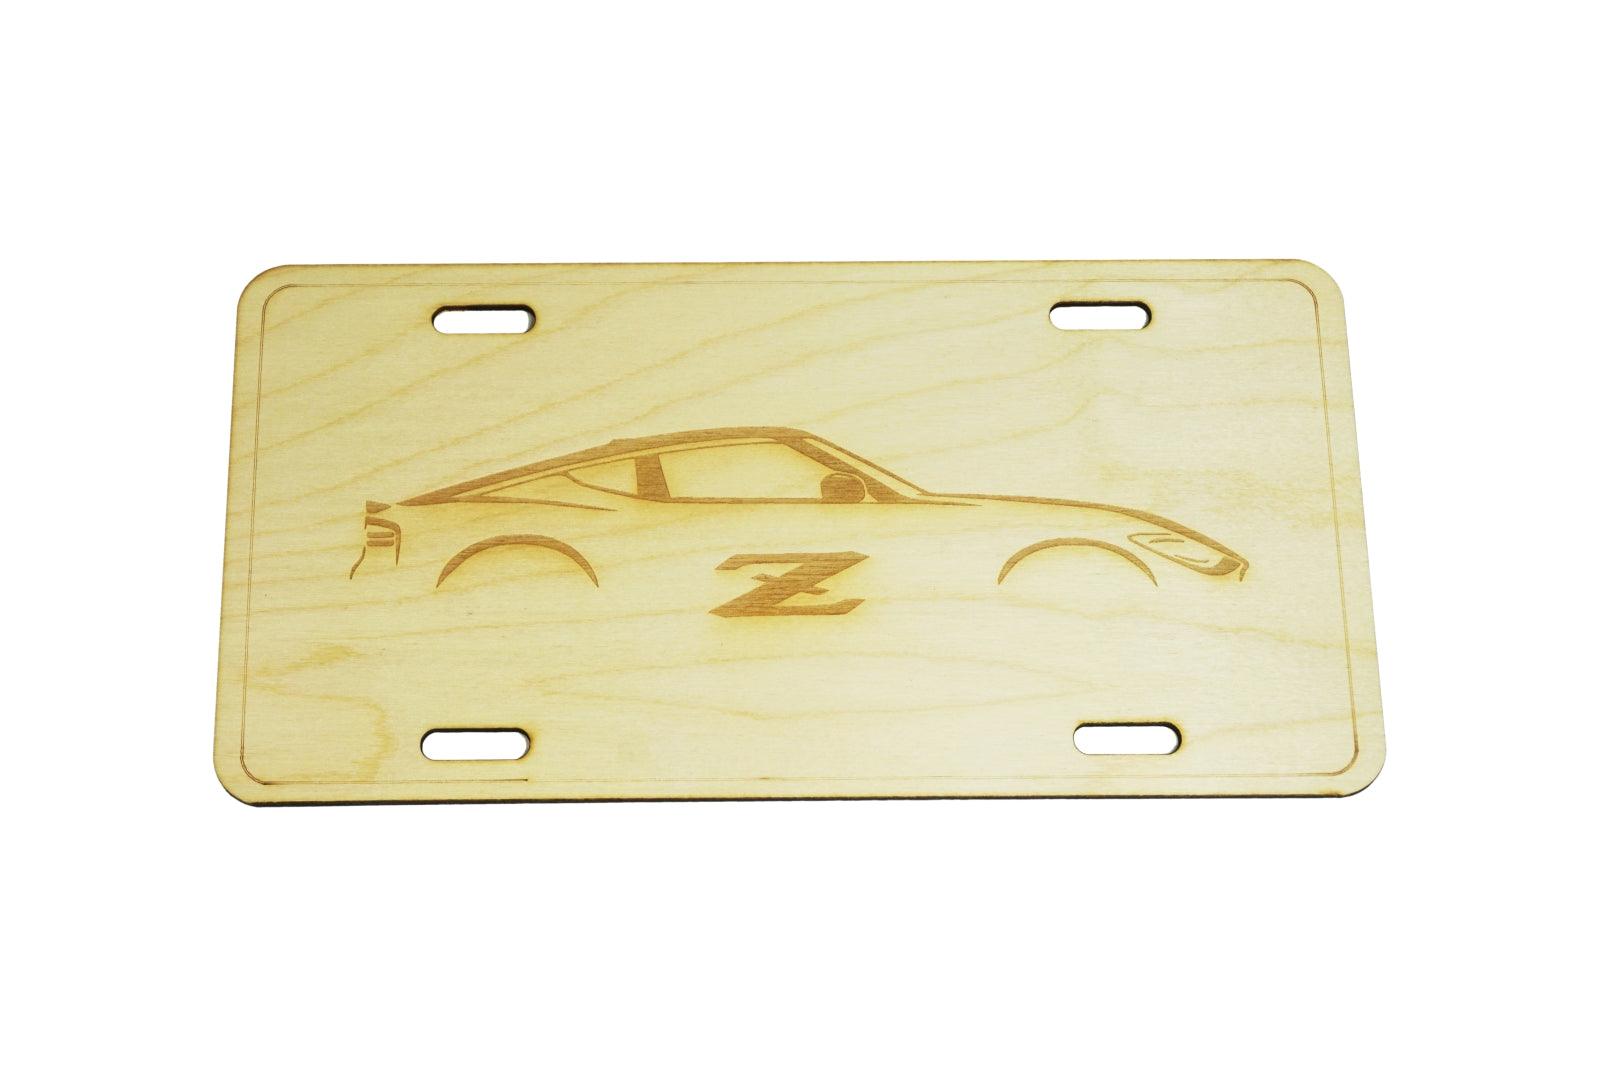 ZSPEC Nissan Z RZ34 Cut-Away License Plate, Birch, Ornamental  1/8' Birch Plywood construction.  Approximately the same size as a traditional license plate ZSPEC Design LLC Toyota 4runner truck